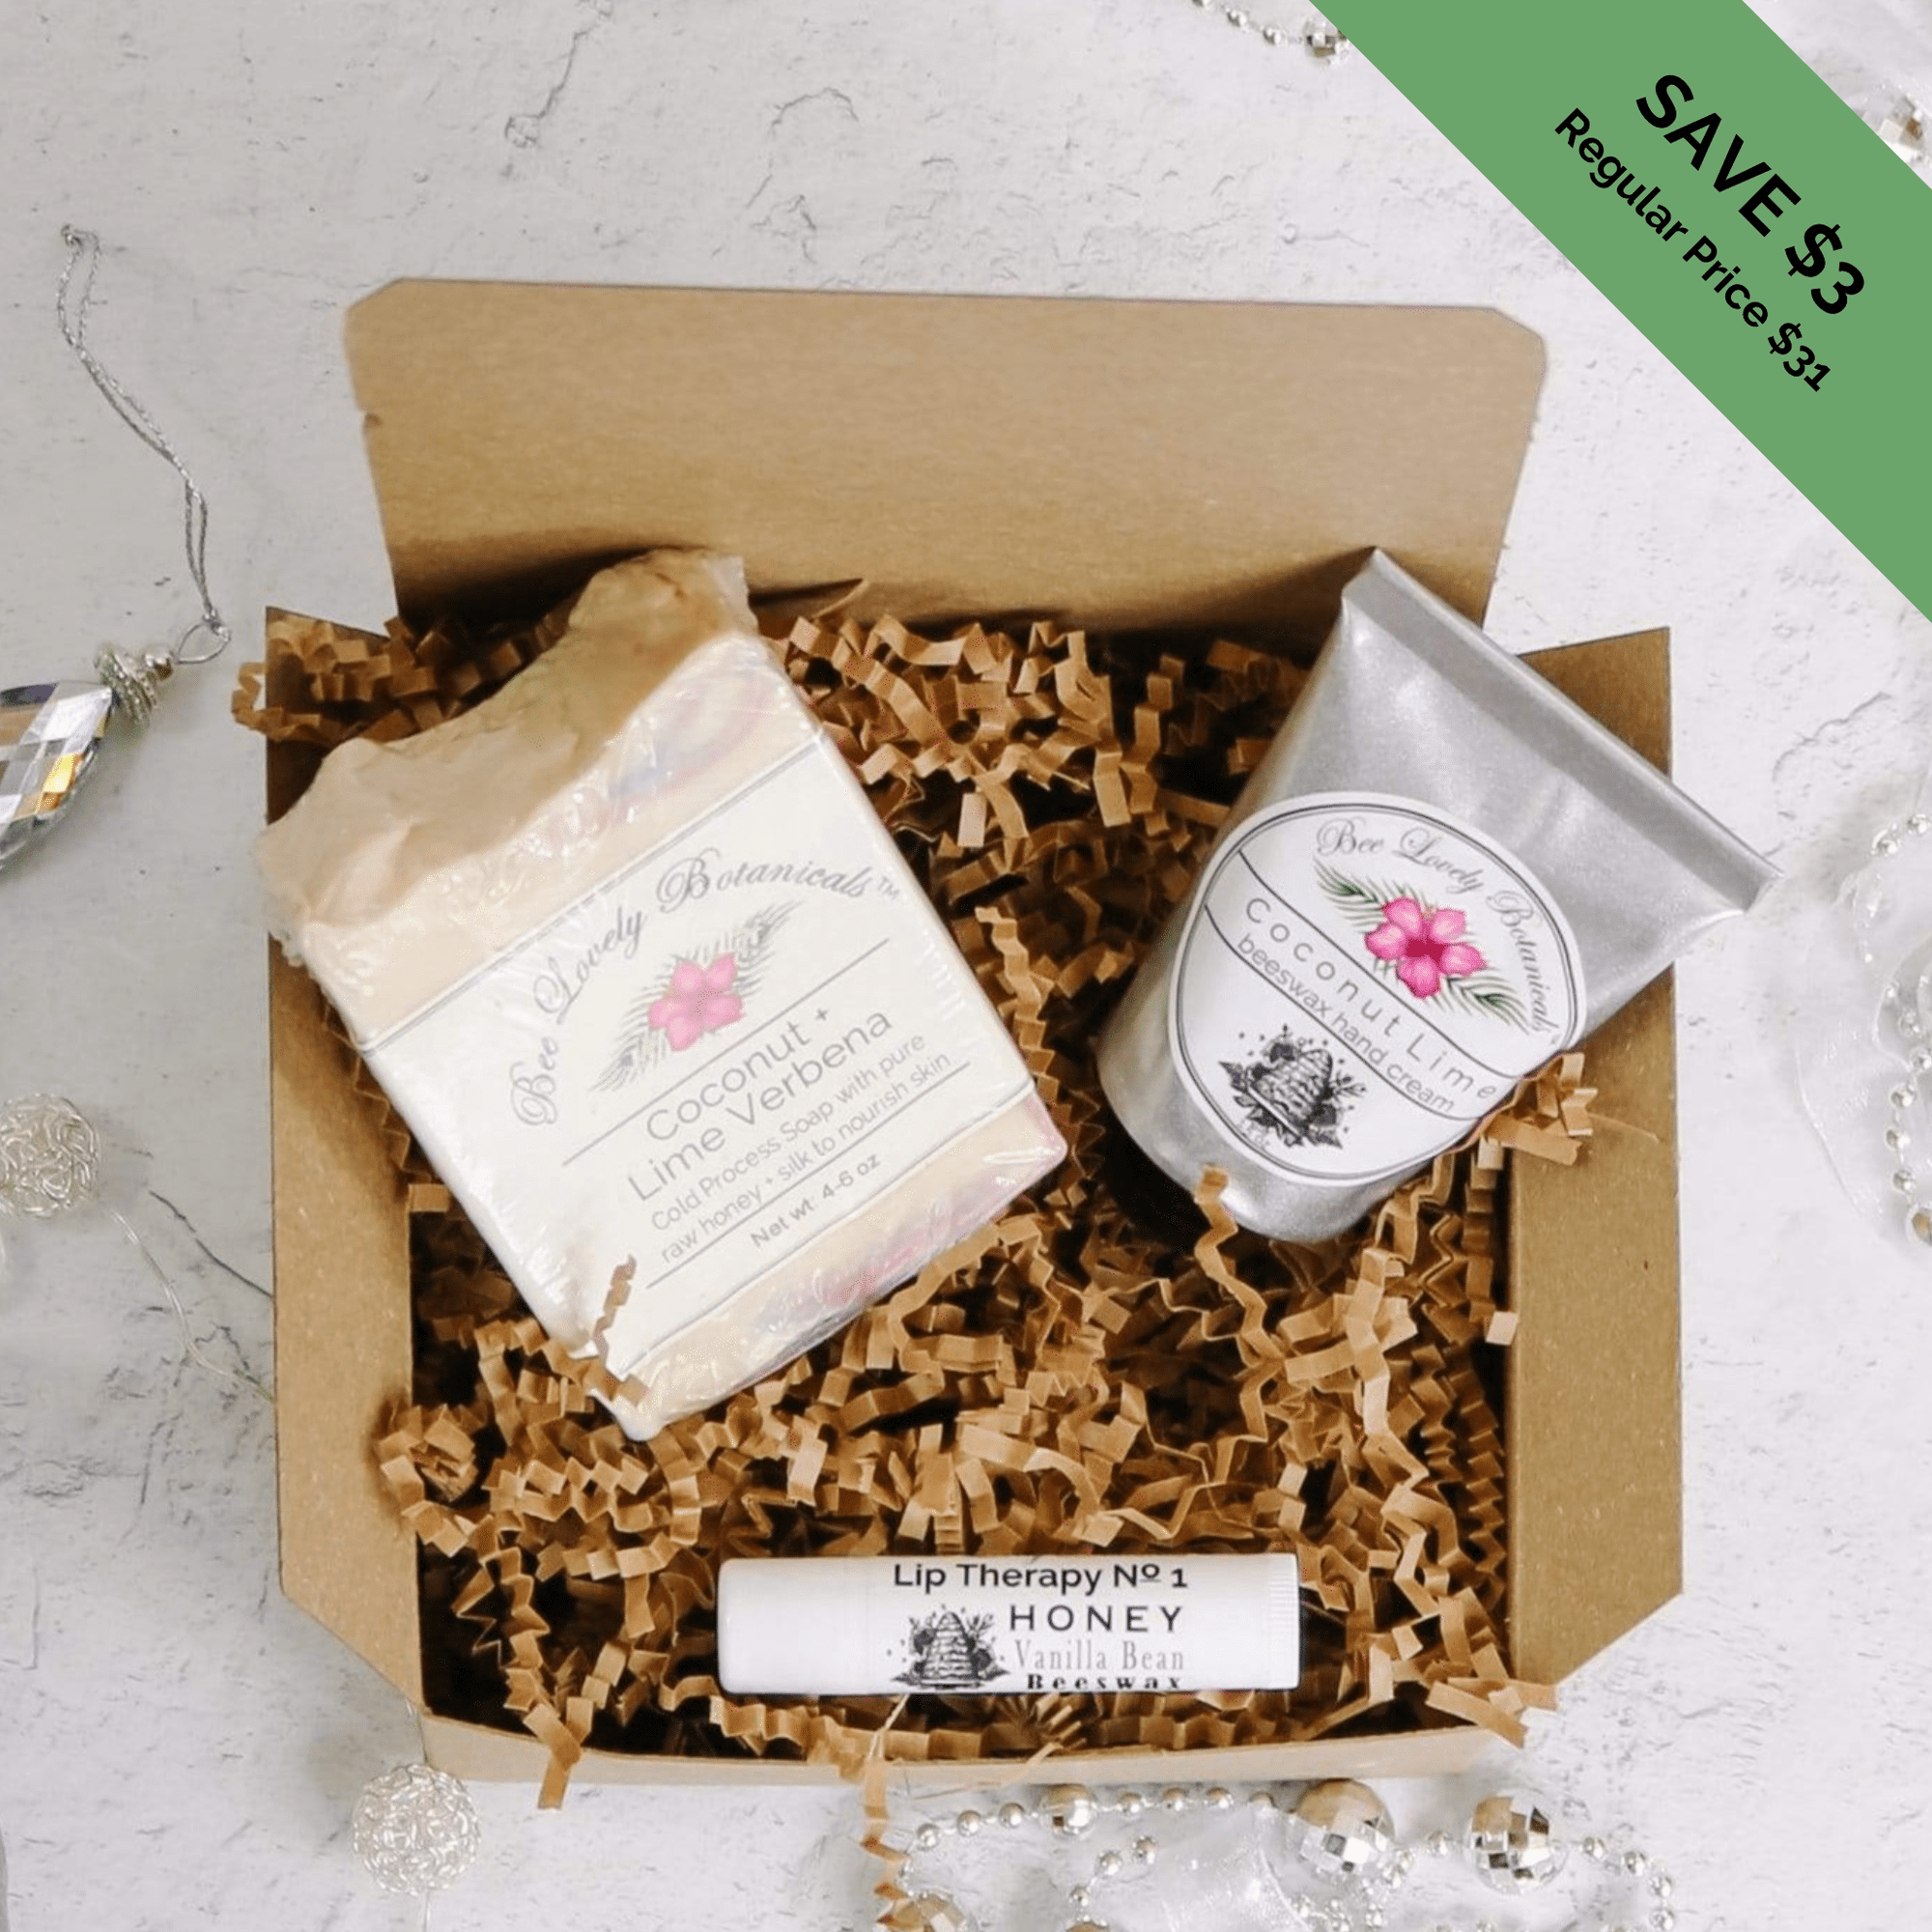 Taos Bee  Bee Wonderful Spa-Inspired Gift Box Set Filled with